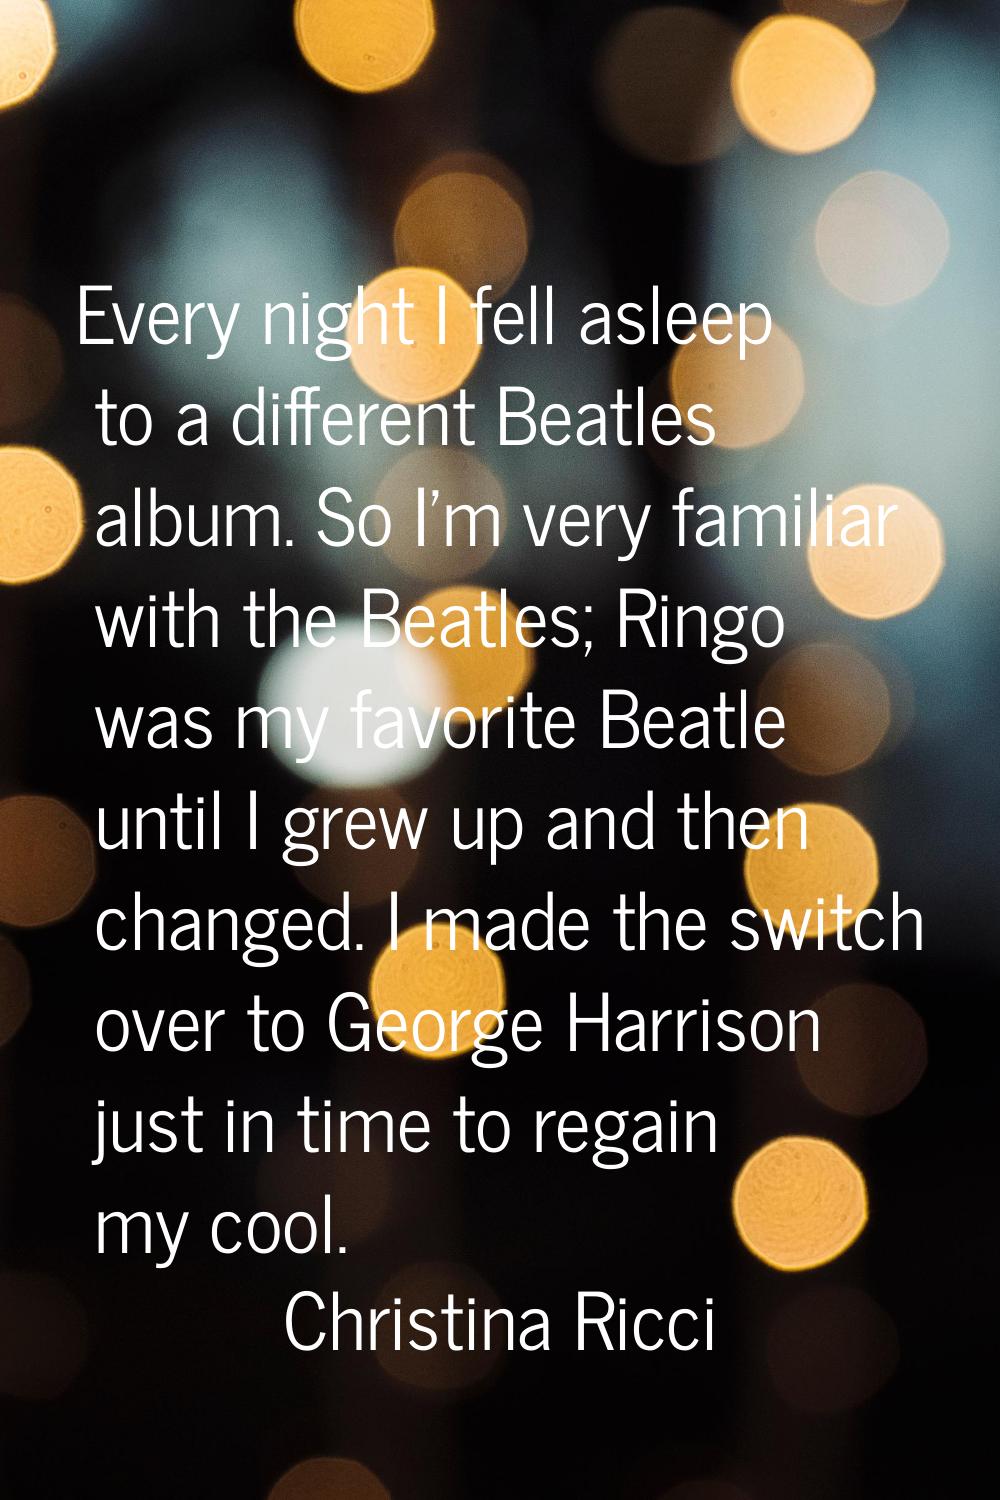 Every night I fell asleep to a different Beatles album. So I'm very familiar with the Beatles; Ring